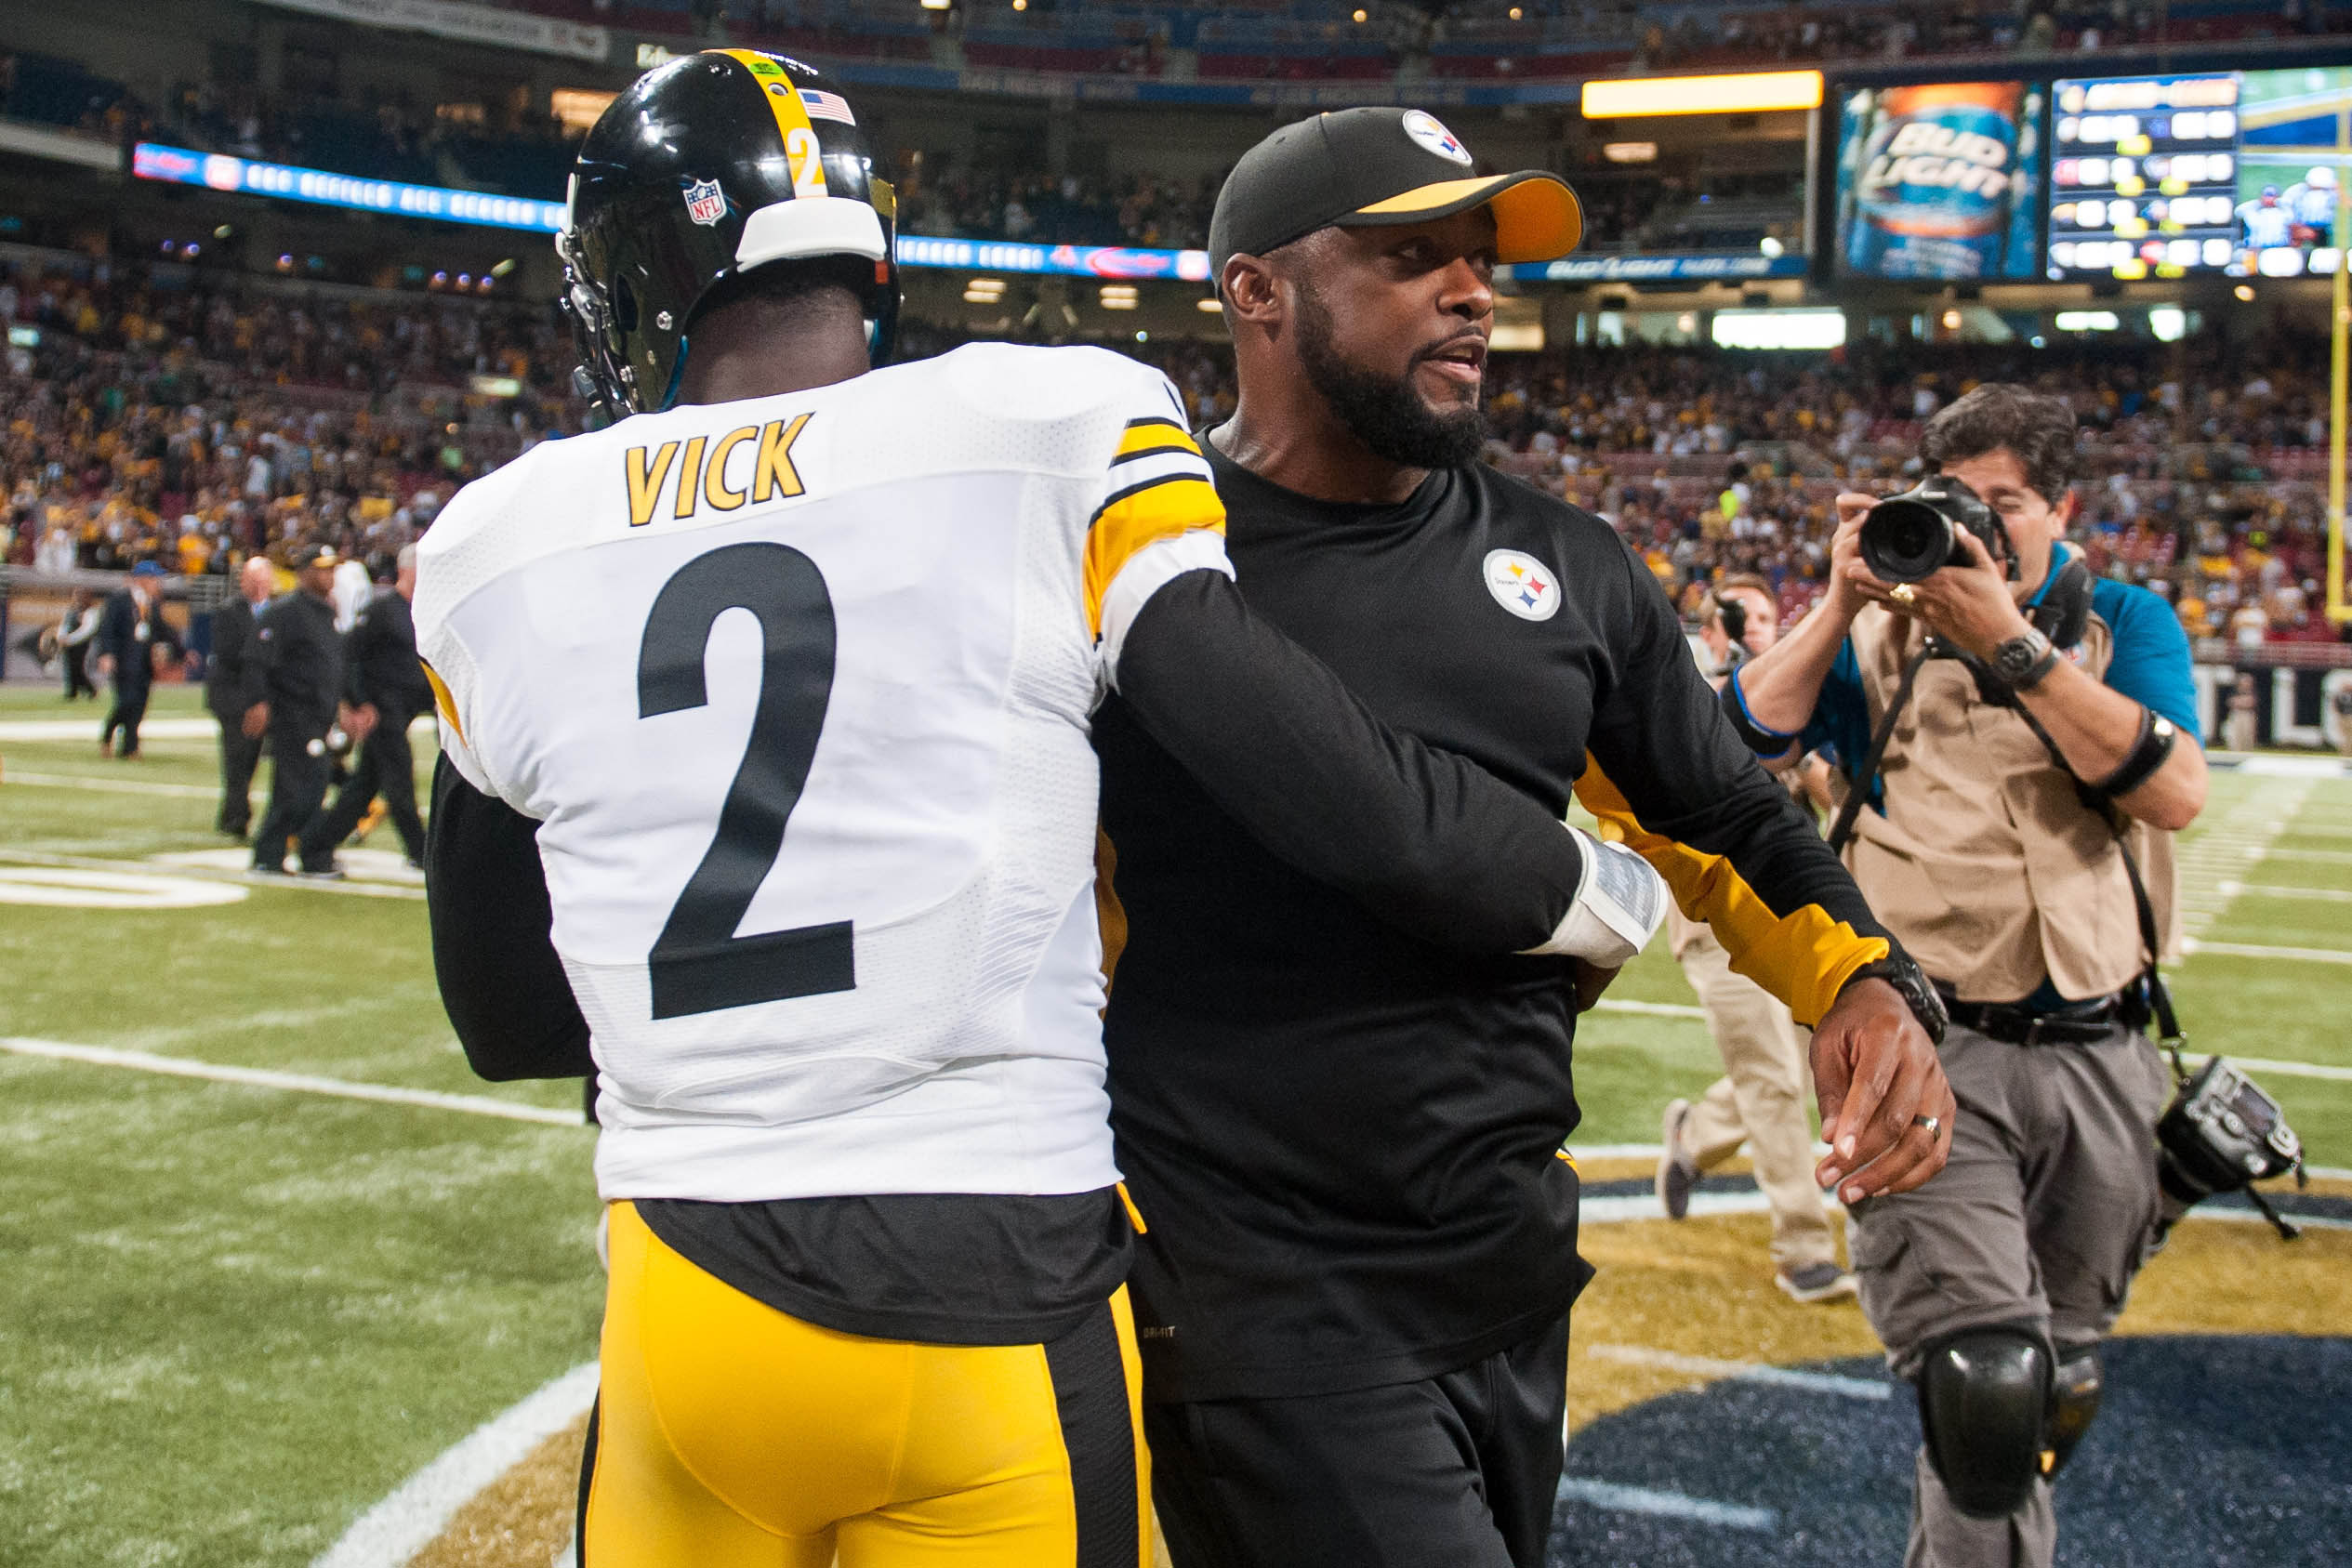 Mike Vick gets a late-career shot to shine tonight in Pittsburgh against the Baltimore Ravens